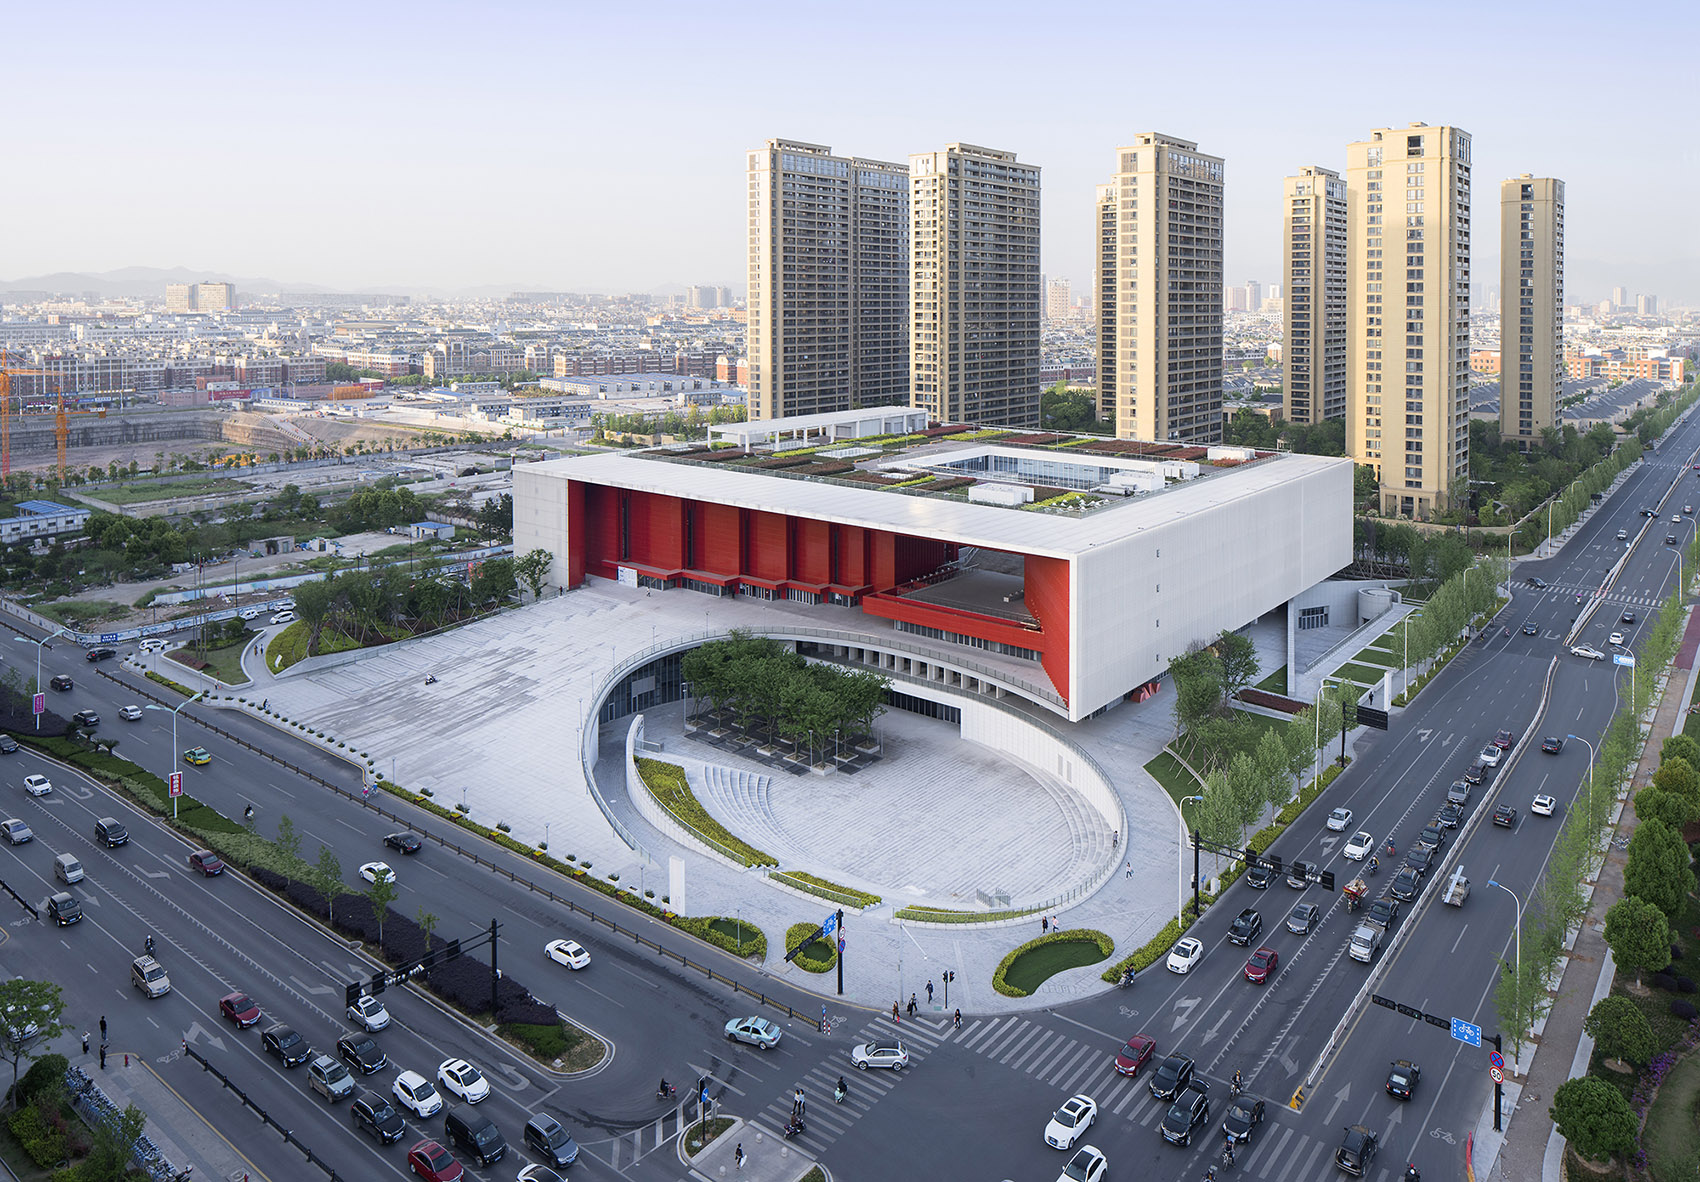 01-yiwu-cultural-square-china-by-by-the-architectural-design-research-institute-.jpg